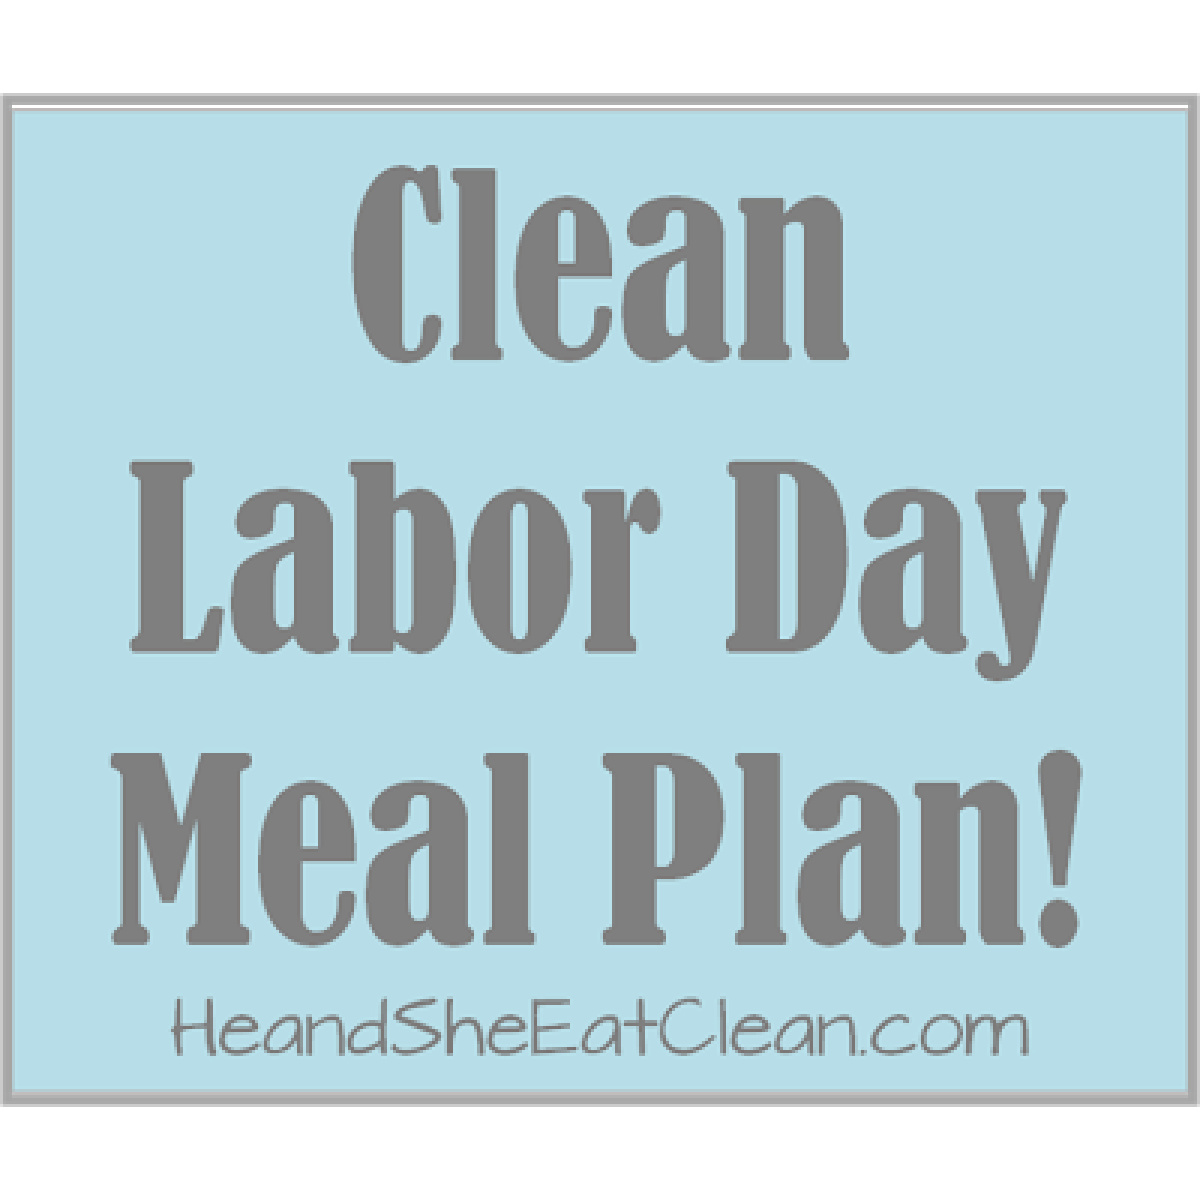 text reads Clean Eating Labor Day Meal Plan